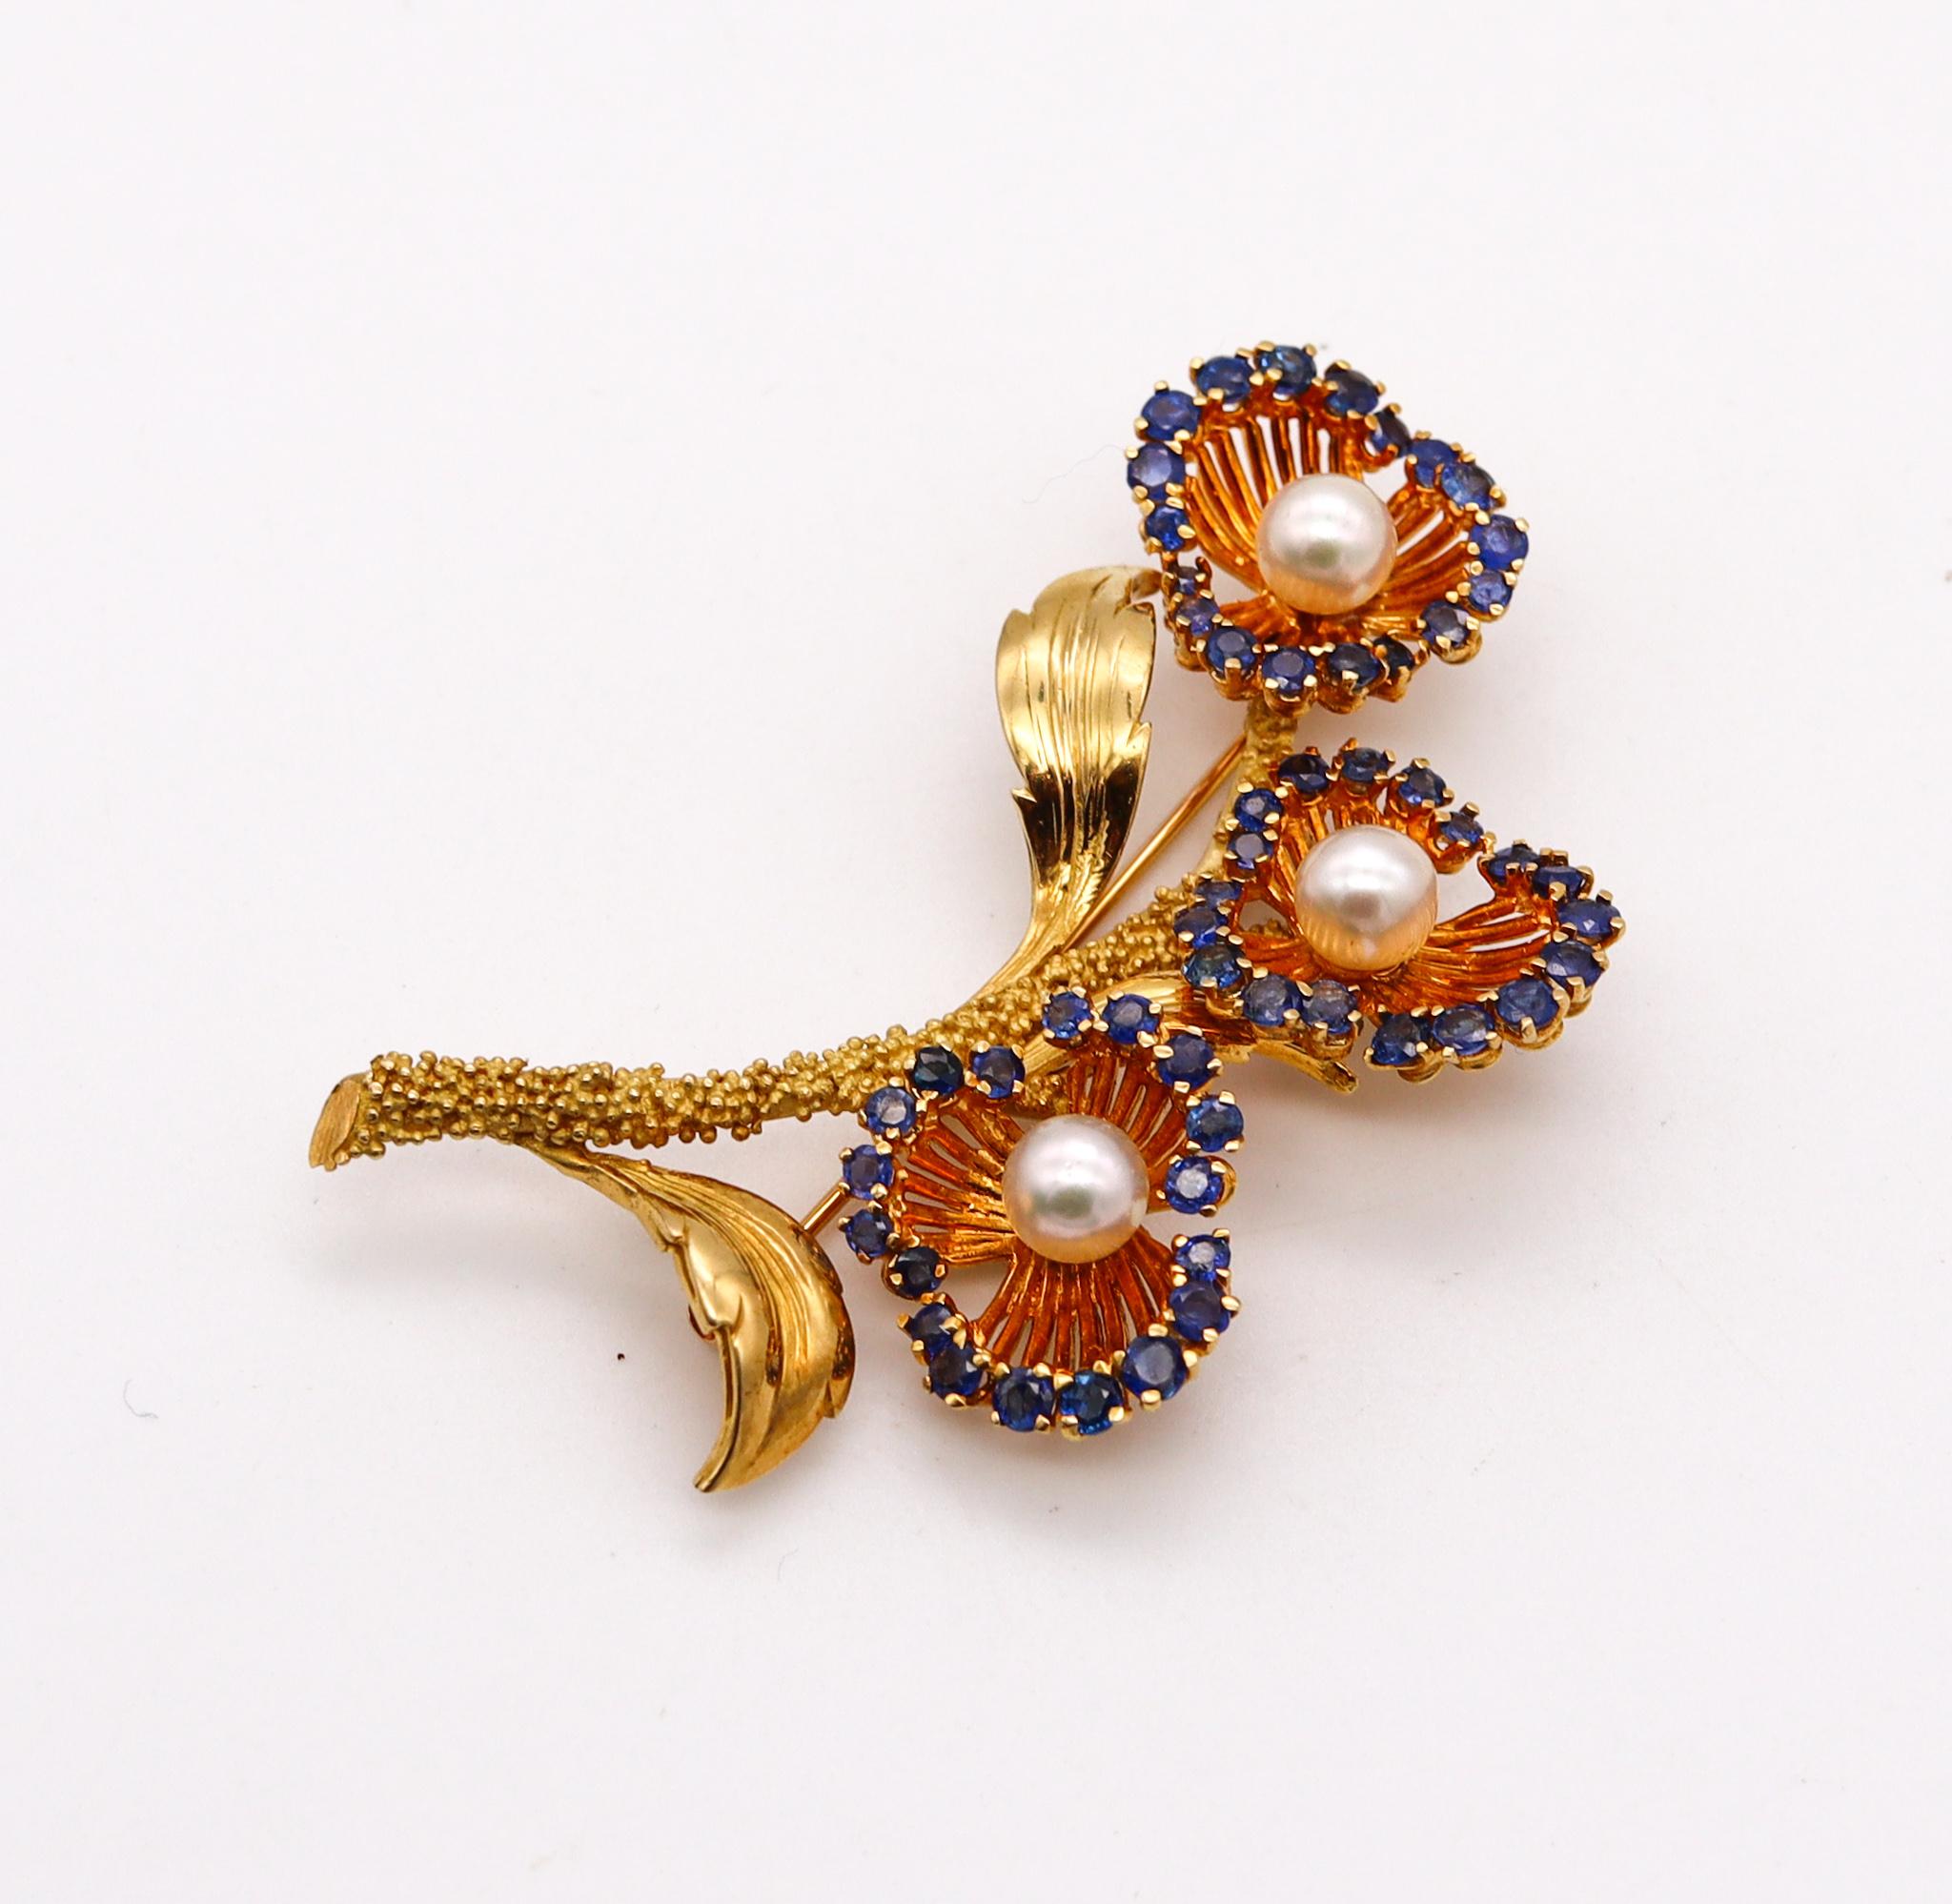 Tiffany Co. 1960 Retro Pin Brooch in 18kt Gold with 3.35 Ct Sapphires and Pearls In Excellent Condition For Sale In Miami, FL